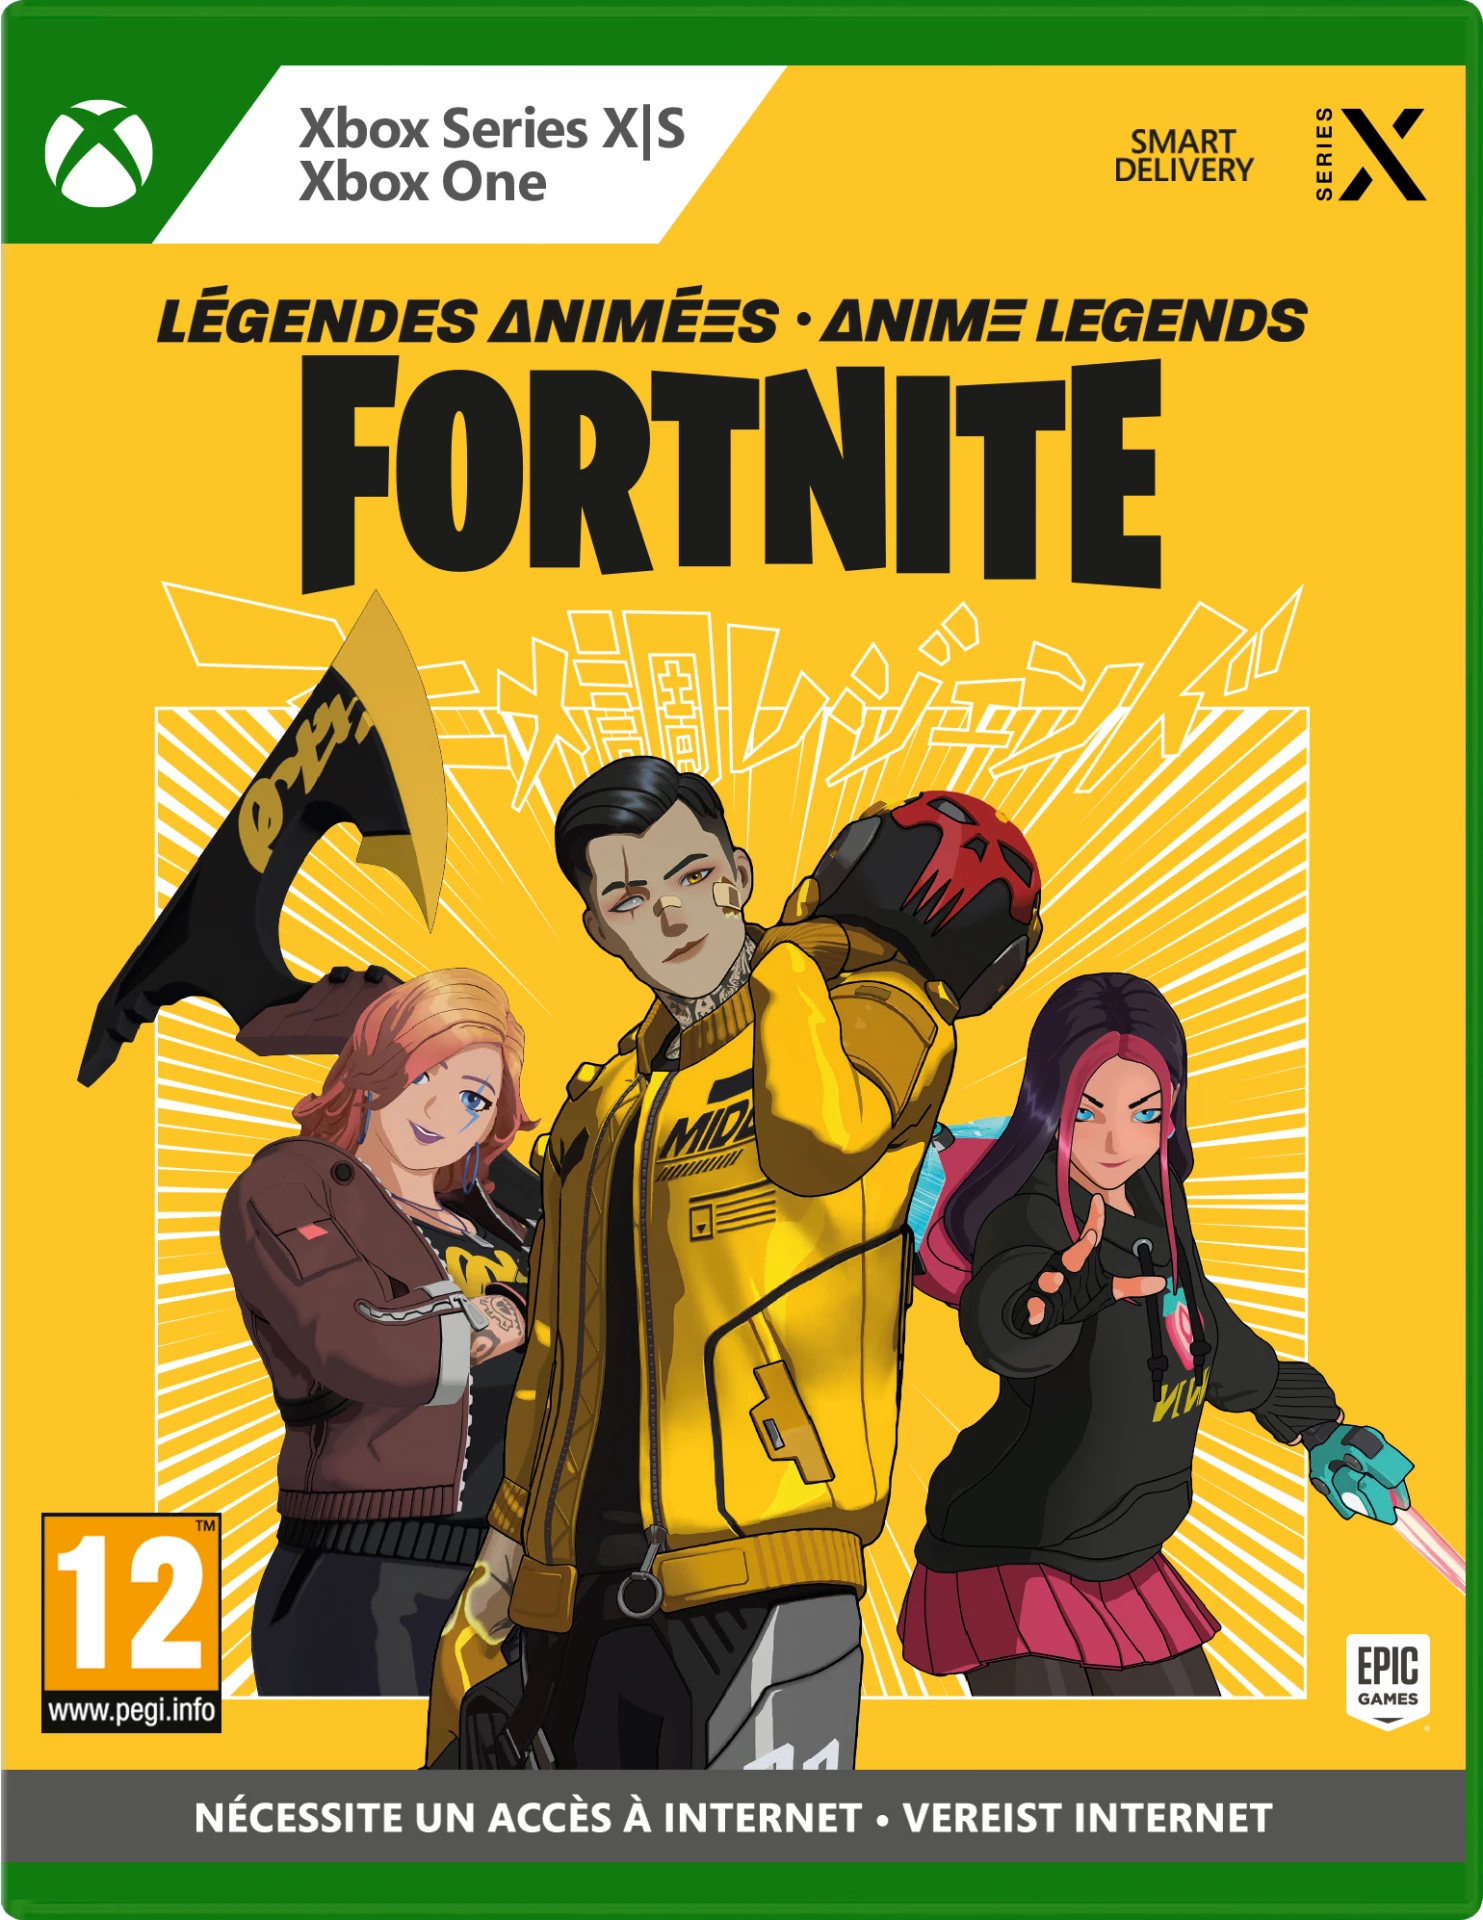 Fortnite: Anime Legends (Xbox One), Epic Games